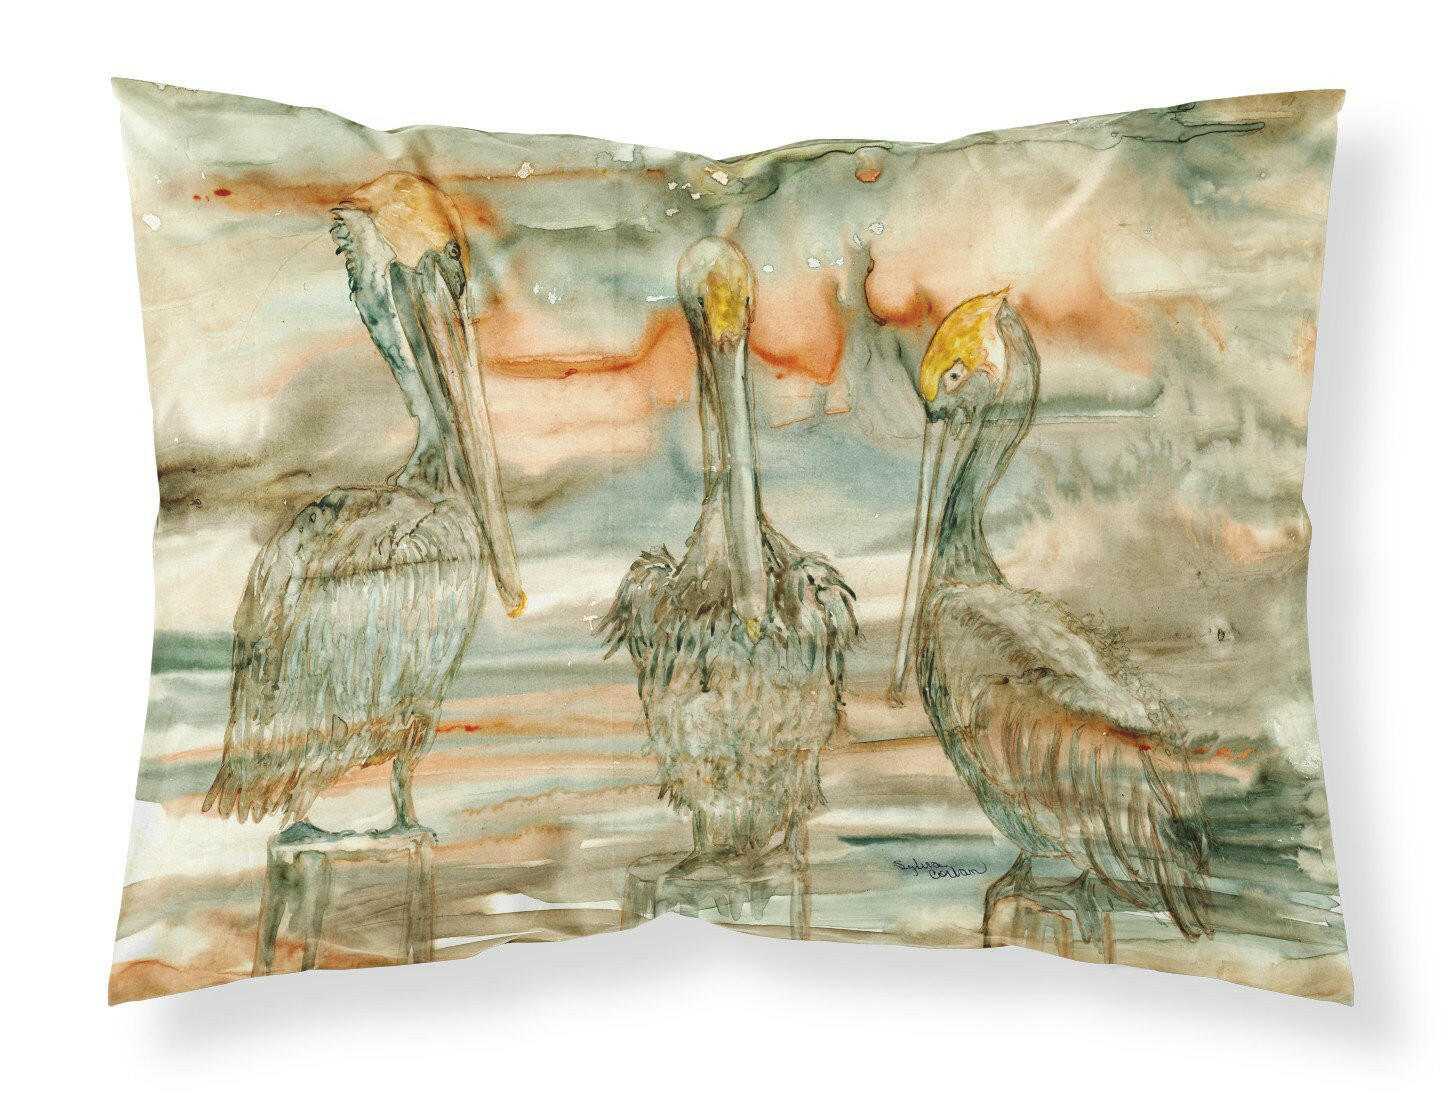 Pelicans on their perch Abstract Fabric Standard Pillowcase 8980PILLOWCASE by Caroline's Treasures